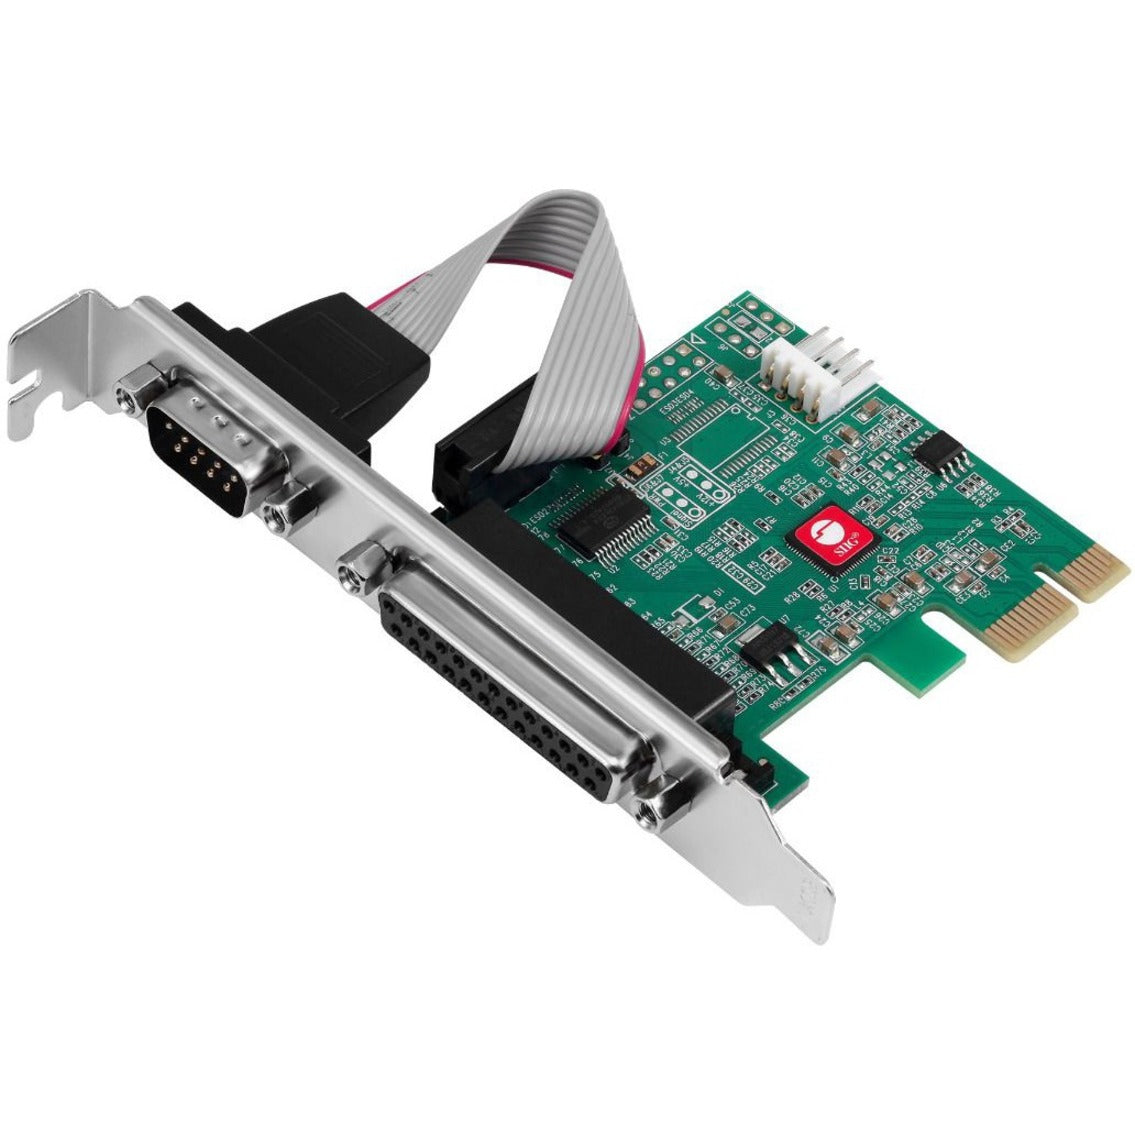 SIIG JJ-E20311-S1 DP Cyber 1S1P PCIe Card, Serial/Parallel Combo Adapter